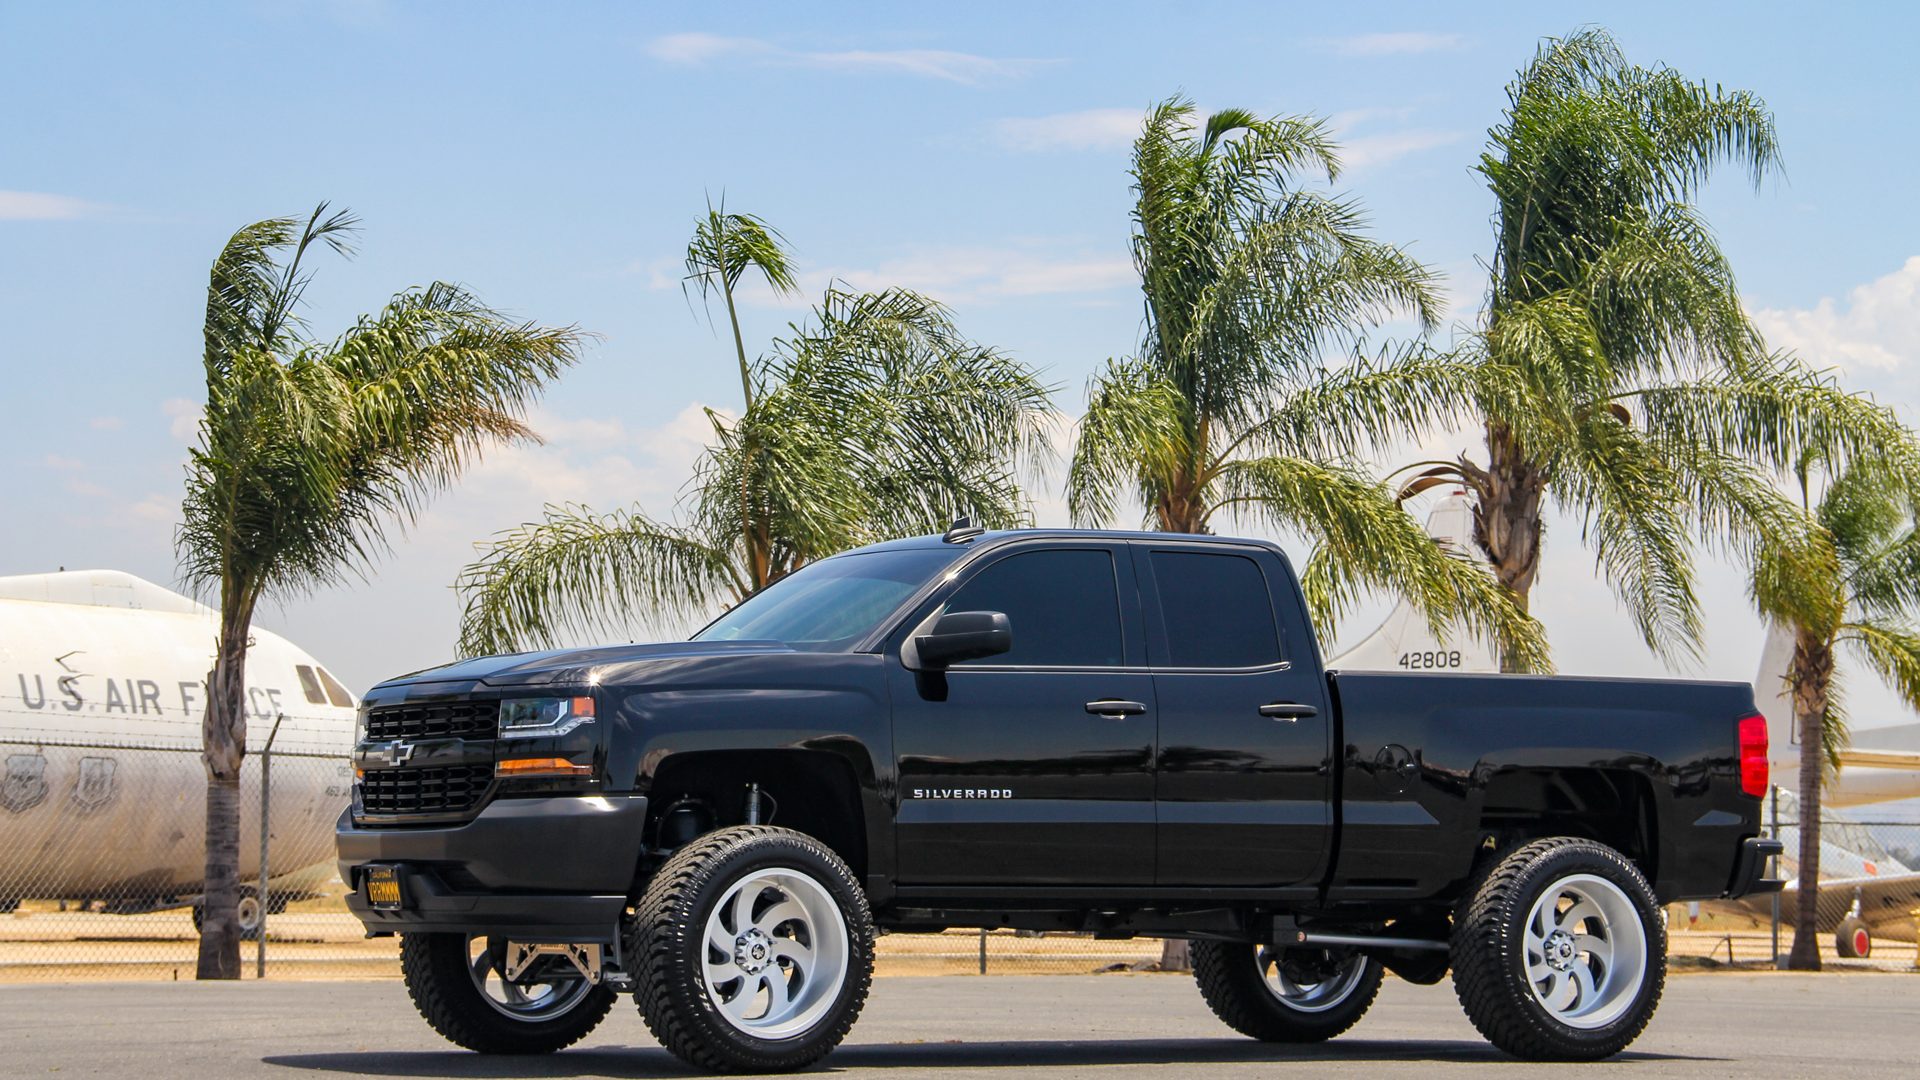 M07 Off-Road Monster Wheels on a Lifted Chevrolet Silverado